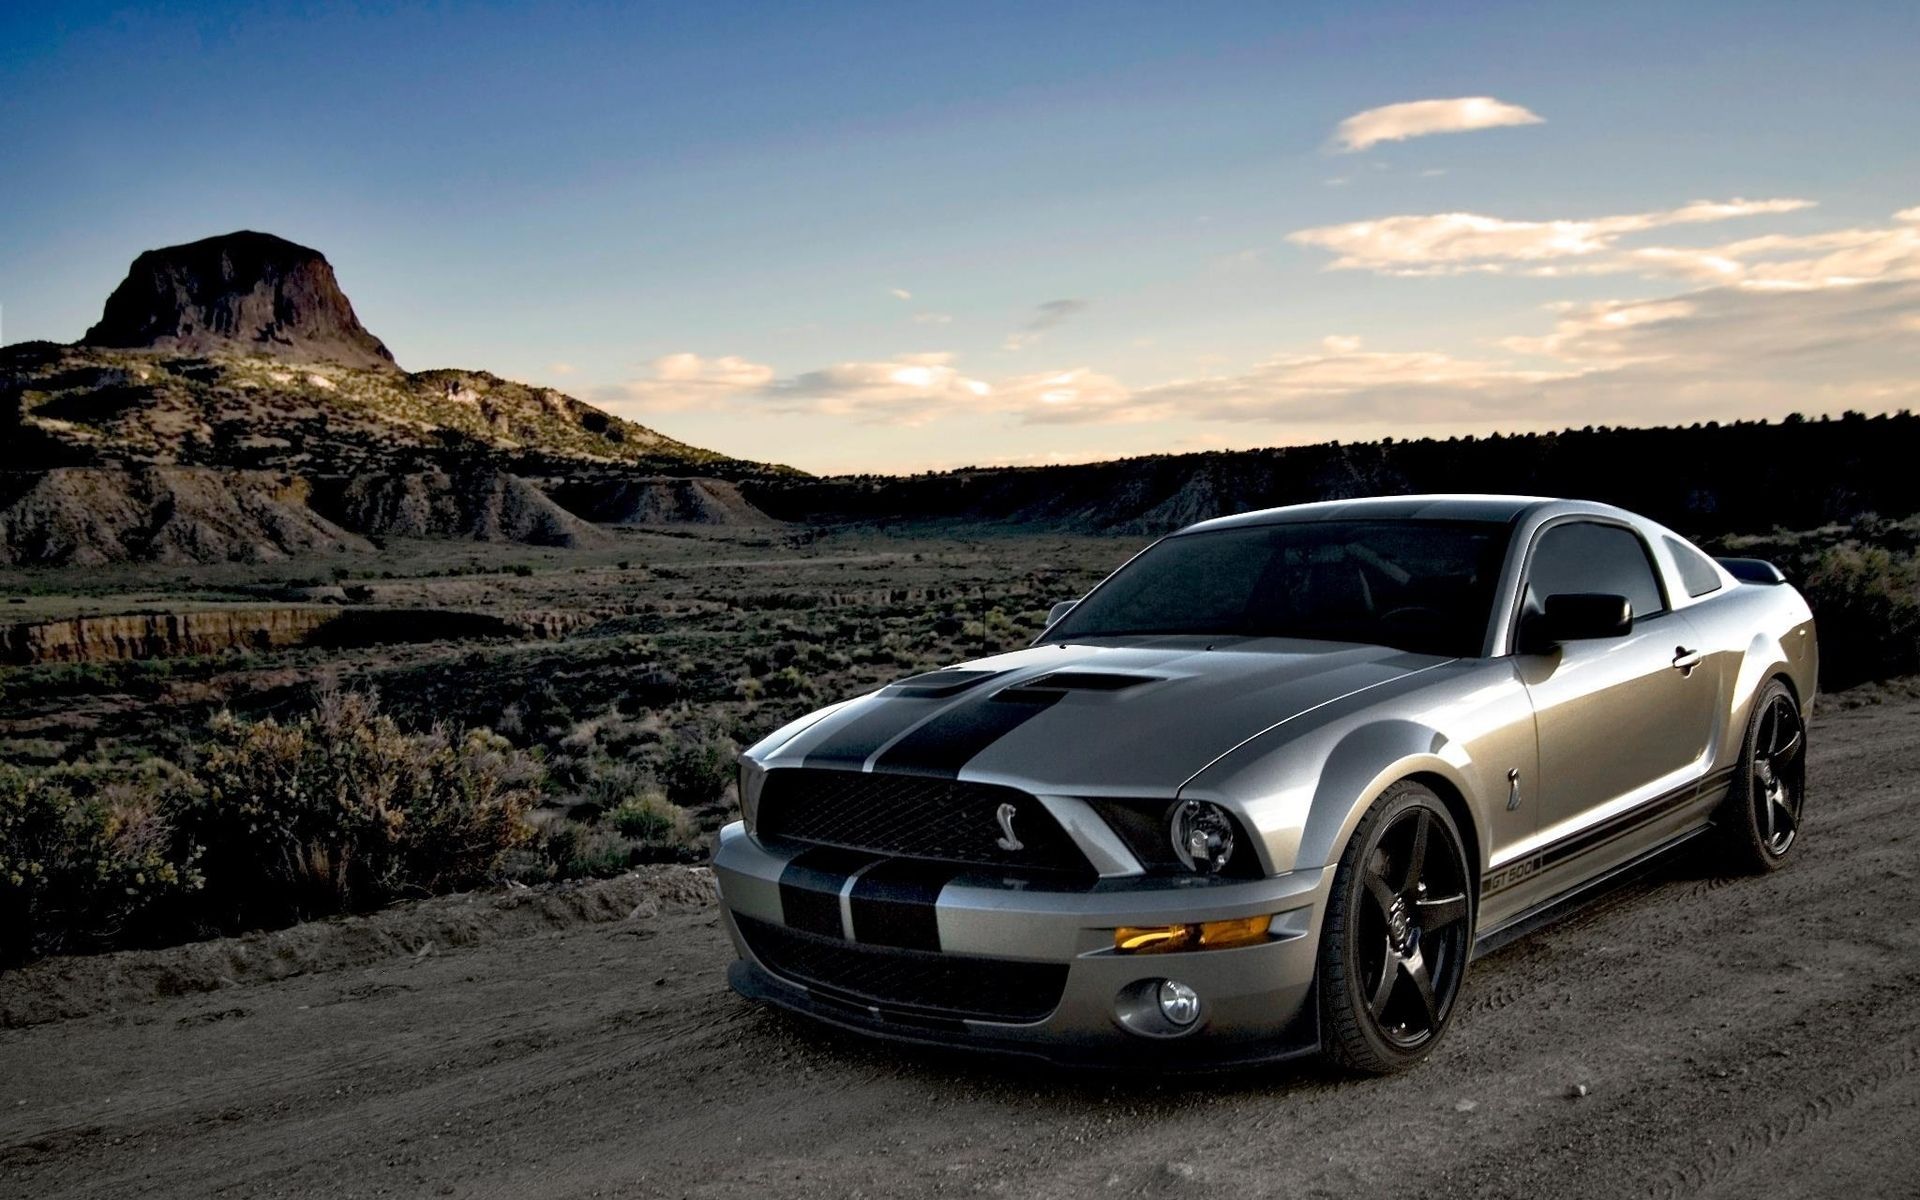 Free download Ford mustang wallpaper HD [1920x1200] for your Desktop, Mobile & Tablet. Explore Ford Mustang Wallpaper. Mustang Desktop Wallpaper, Ford Mustang Cobra Wallpaper, Shelby Mustang Wallpaper for Computer